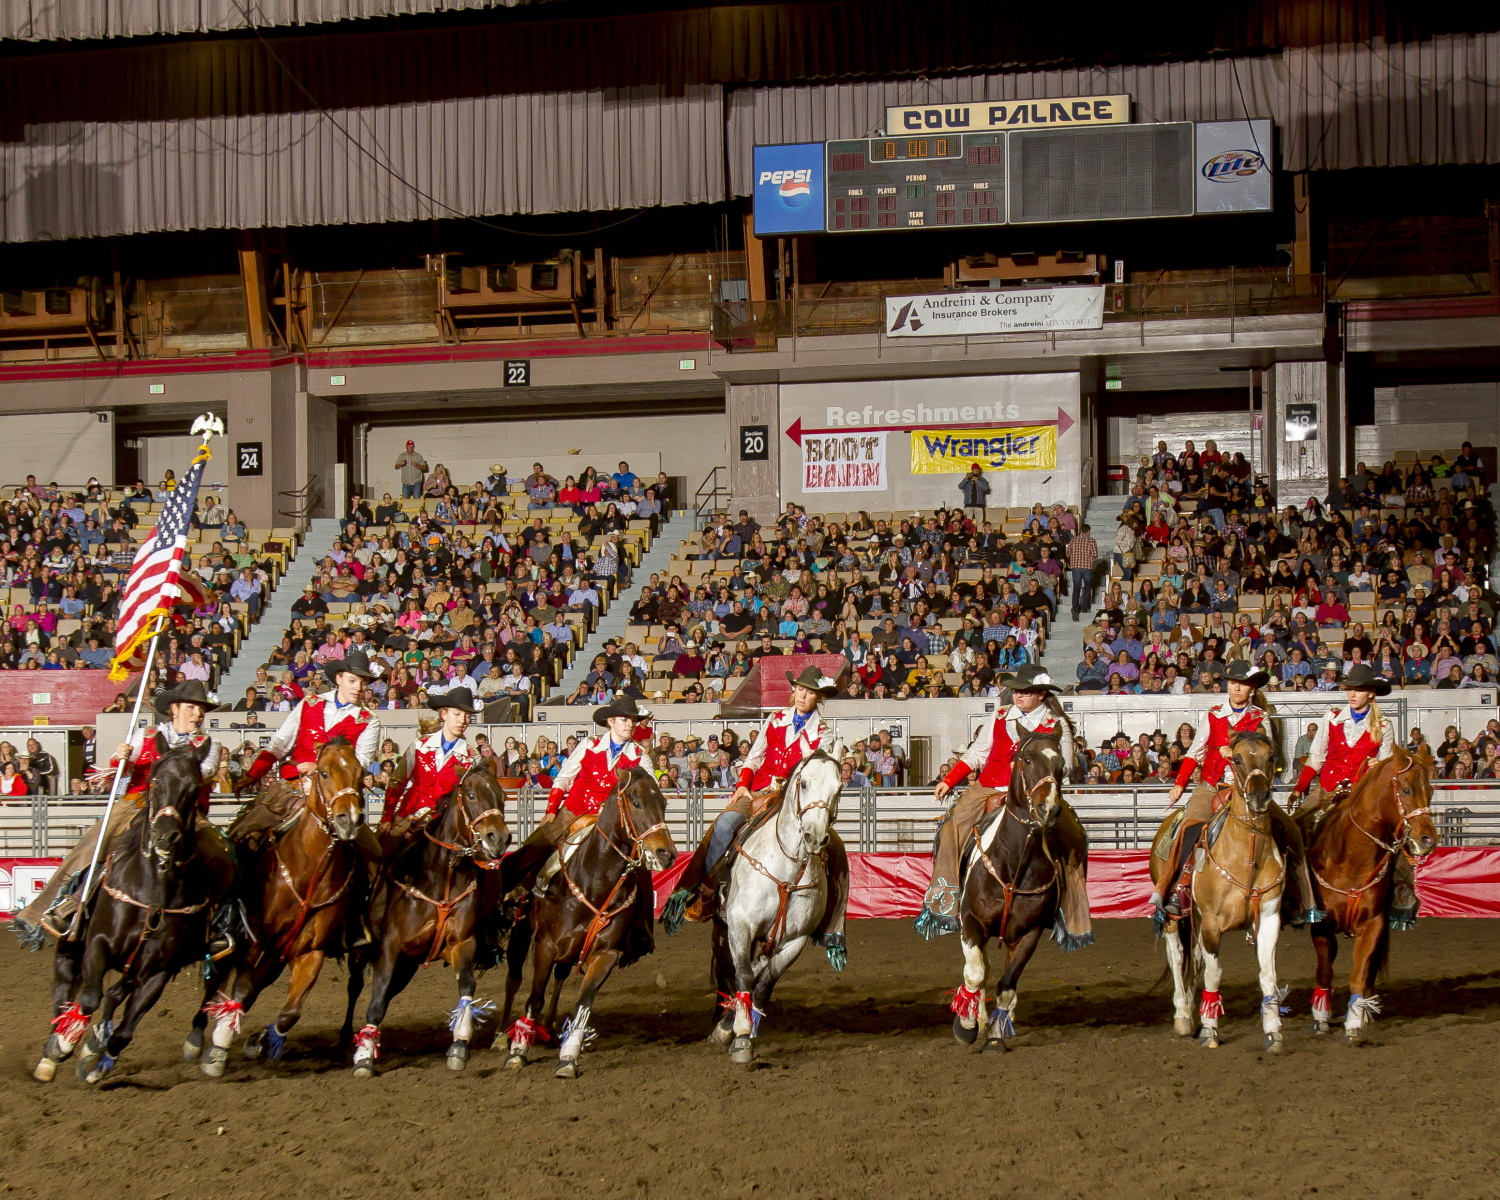 A team of riders on horses carrying flags parades in an arena at the &quot;Cow Palace&quot; in front of a large audience.